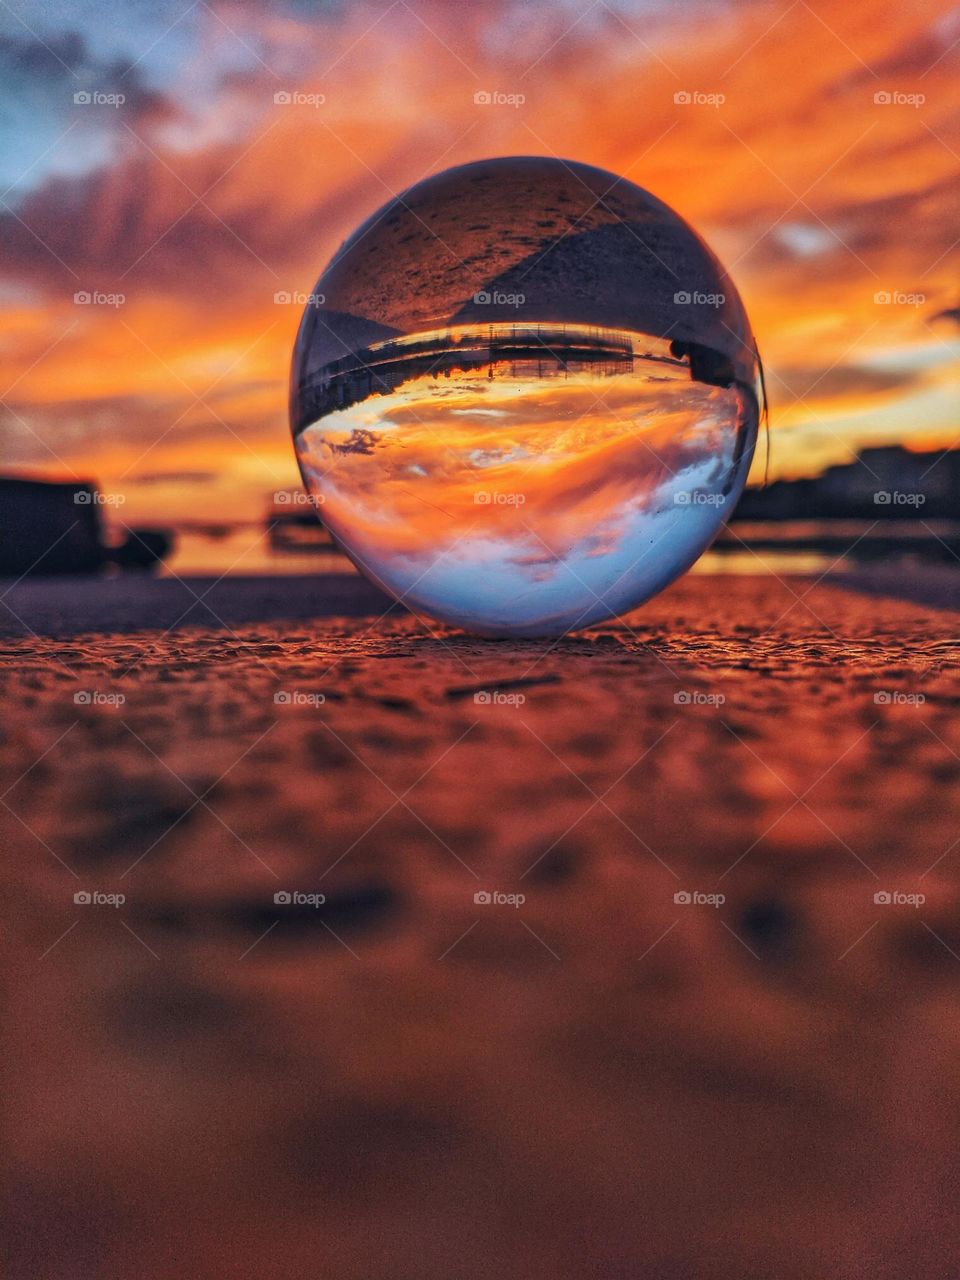 Ground up photo of the lens ball, crystal ball reflected in the road at the red sunset light